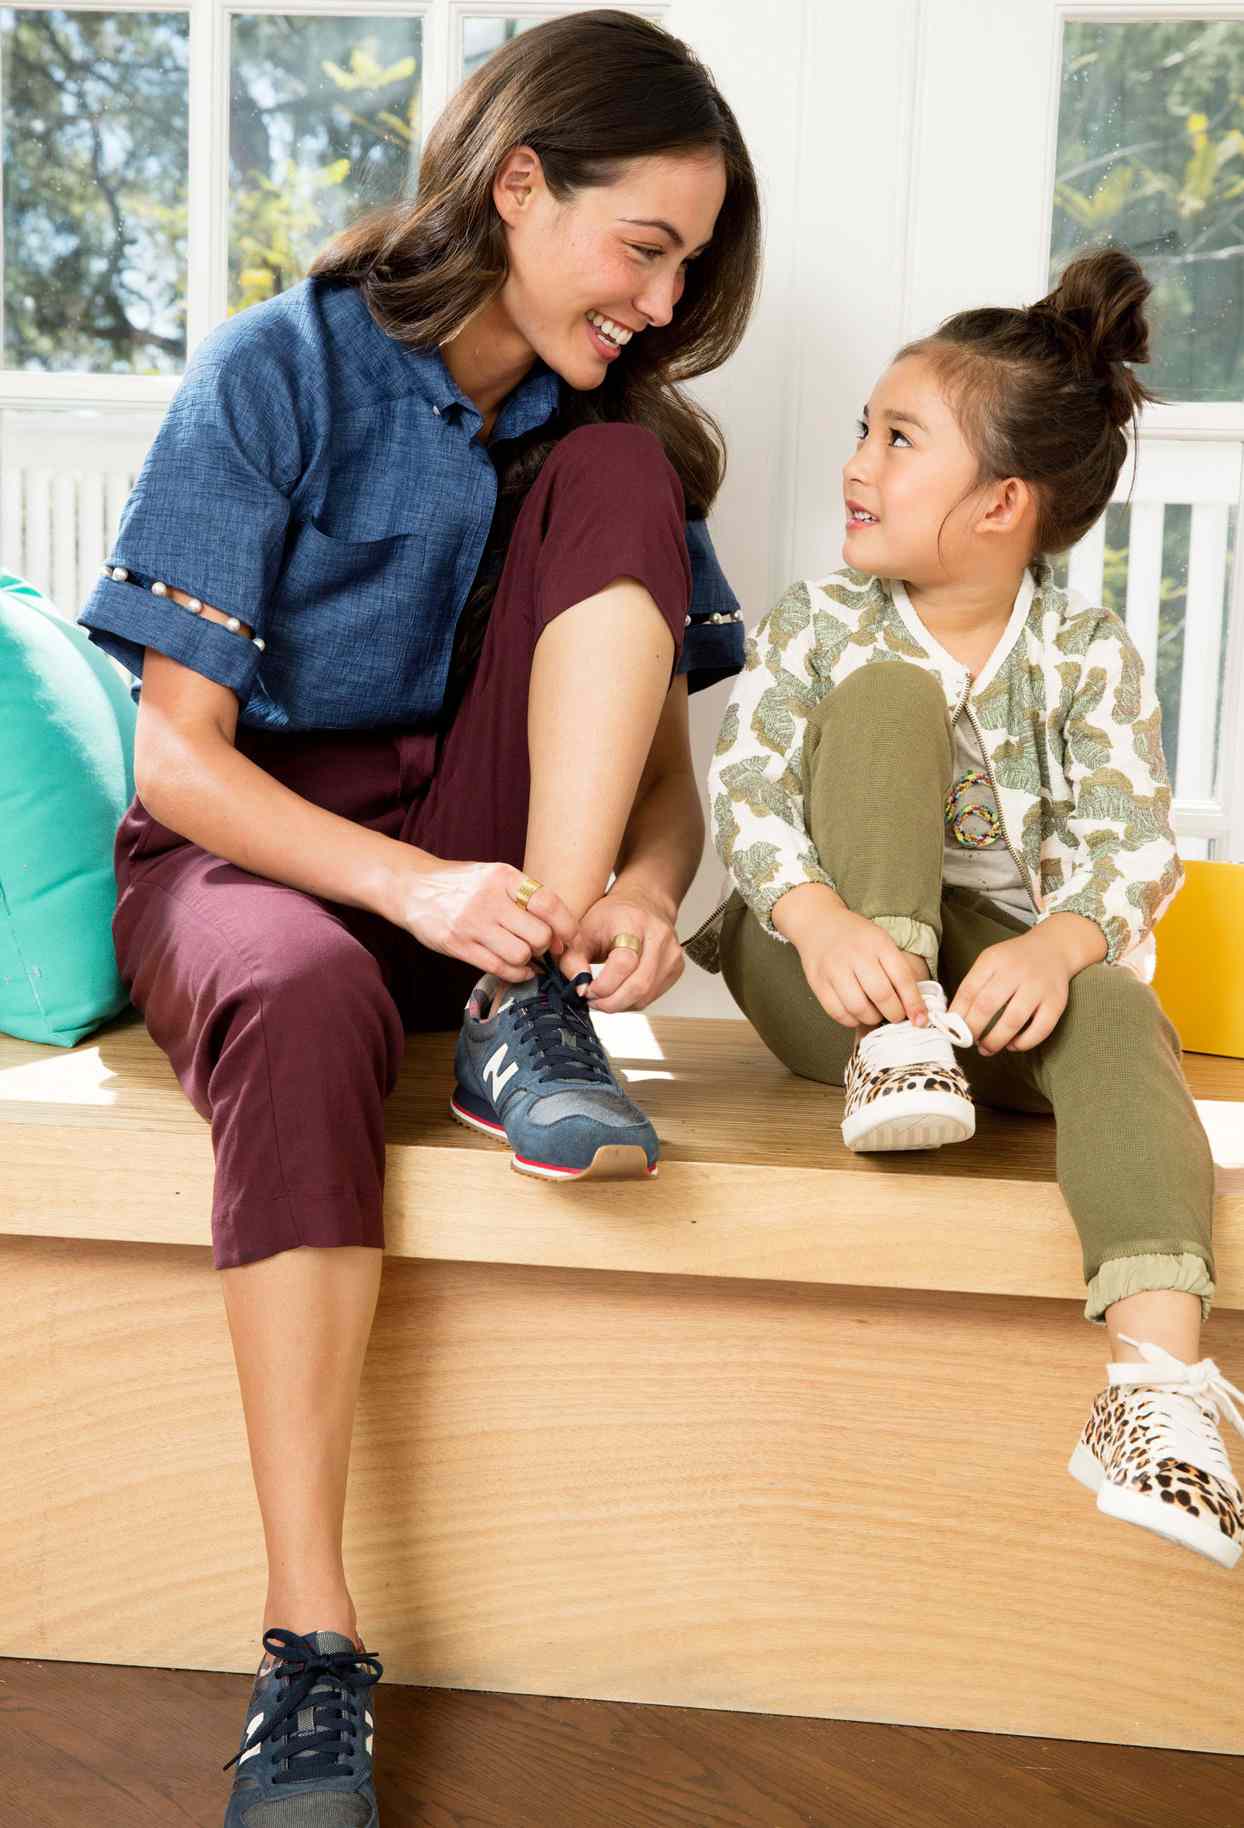 woman tying her shoes with a child